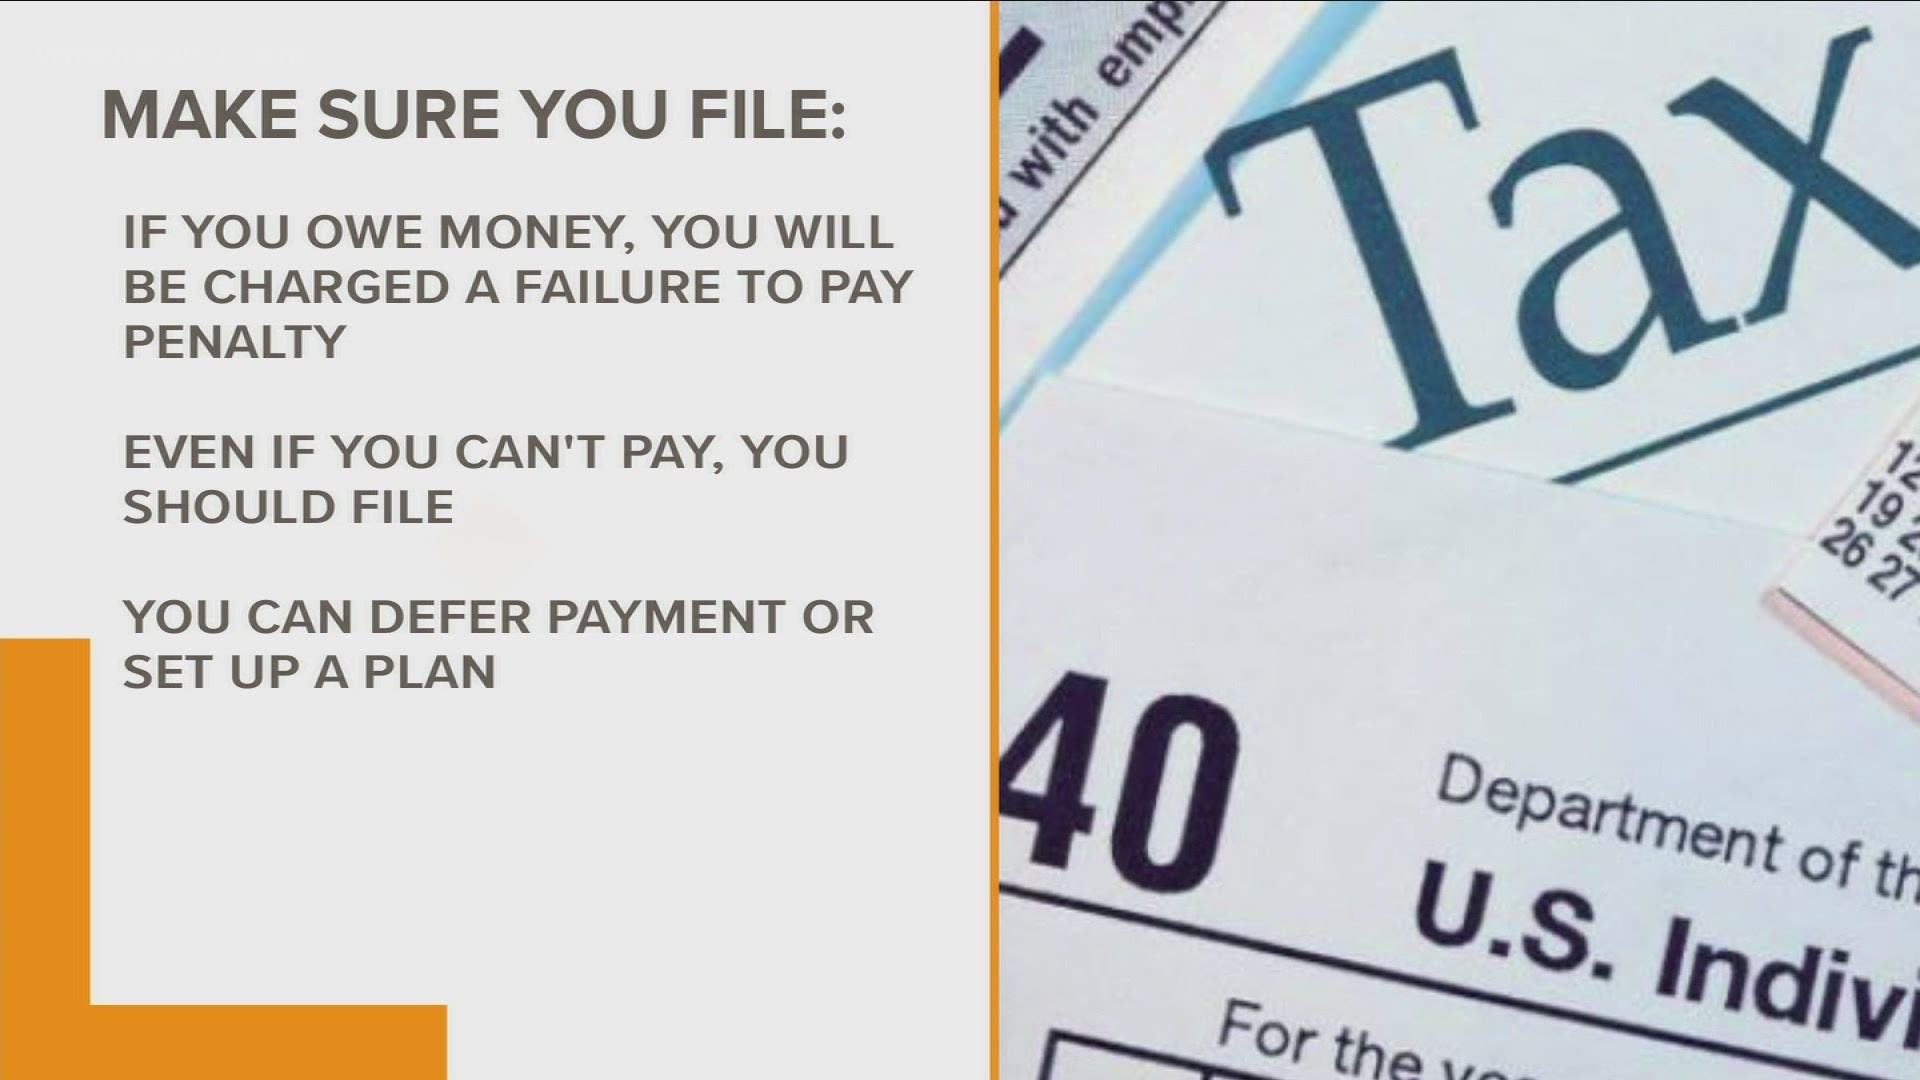 Money expert Ja'Net Adams offers tips to get your taxes in on time, plus three reasons why you don't want to put it off.